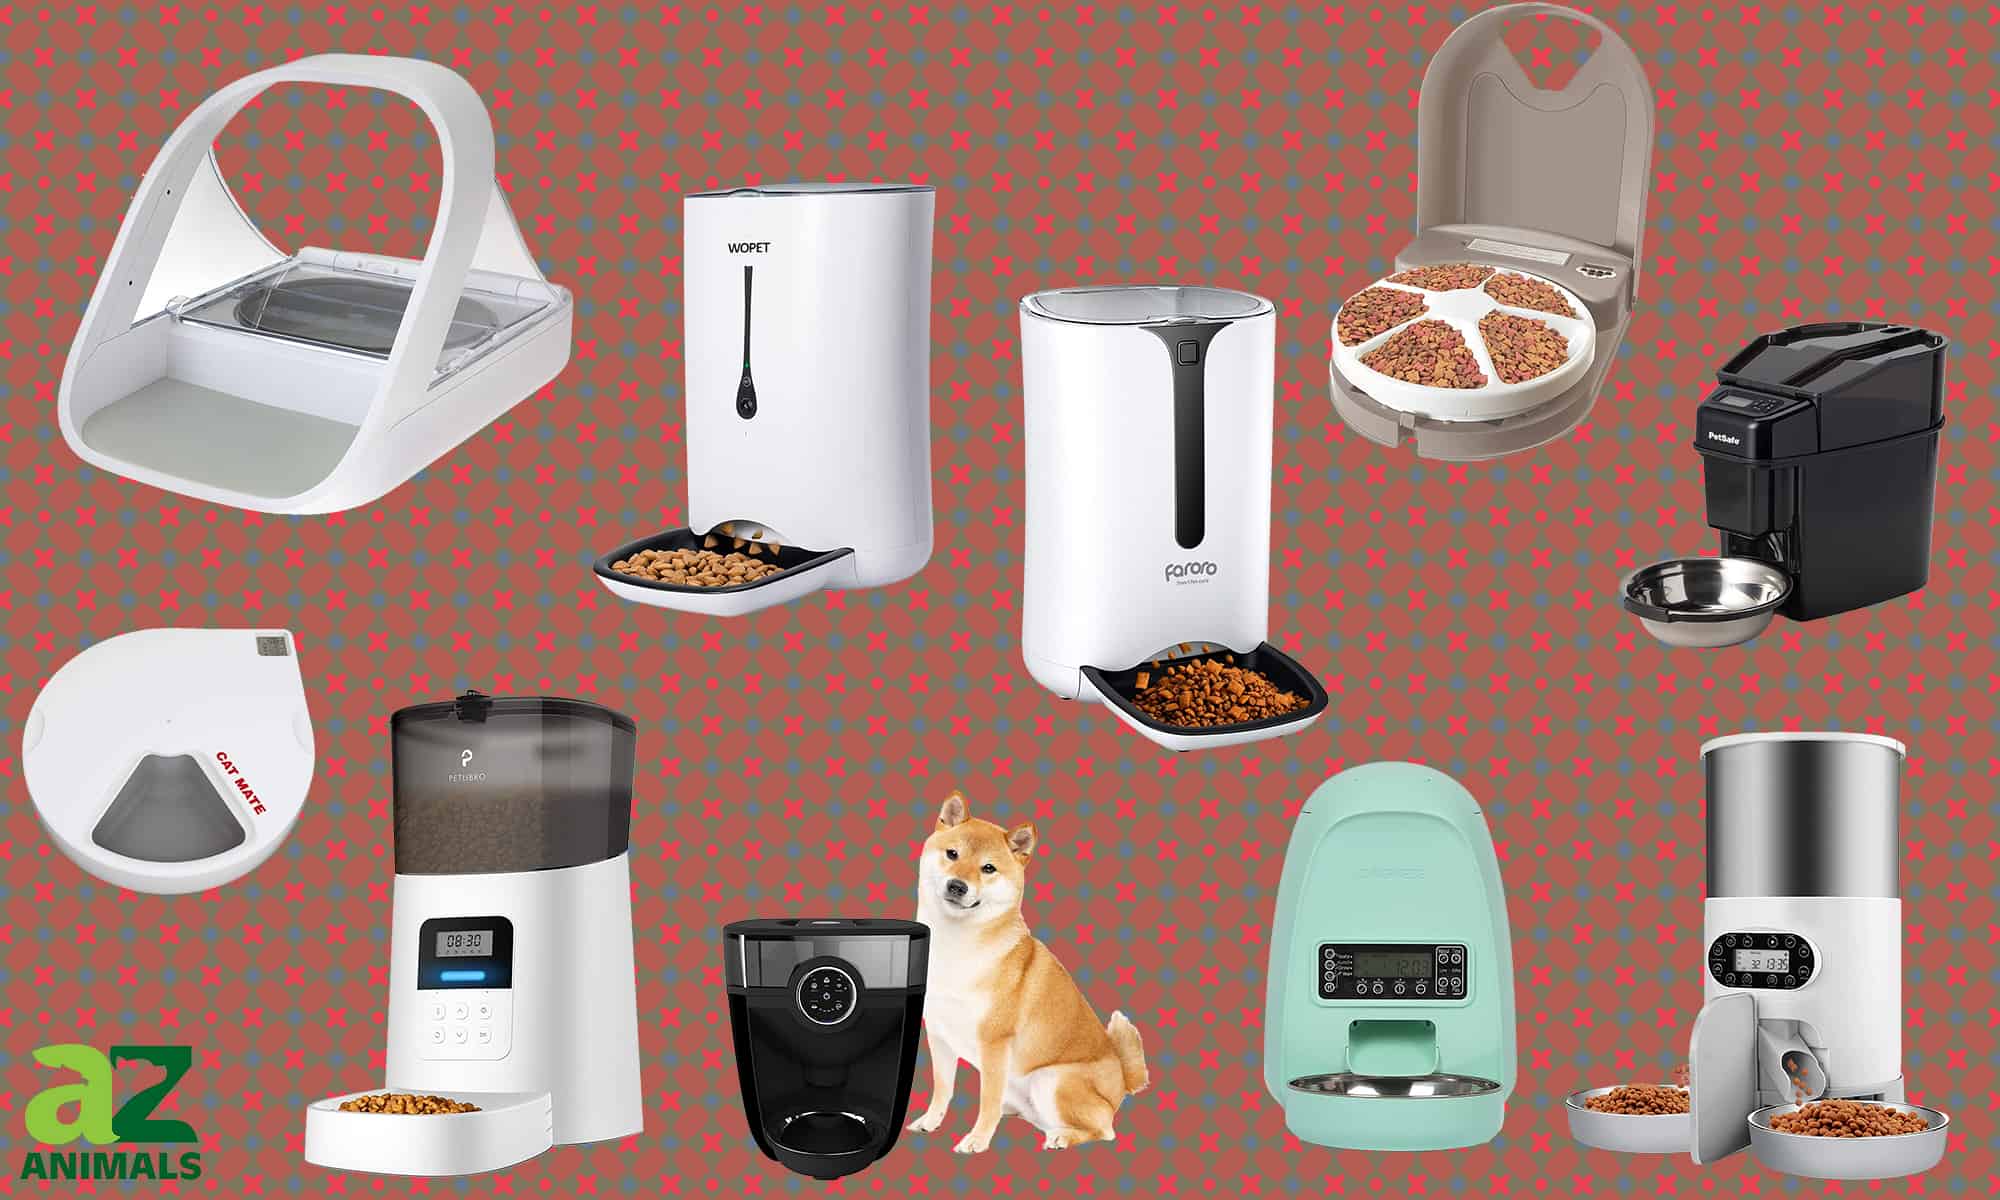 PetSafe 5 Meal Pet Feeder review: Low-tech, but affordable option